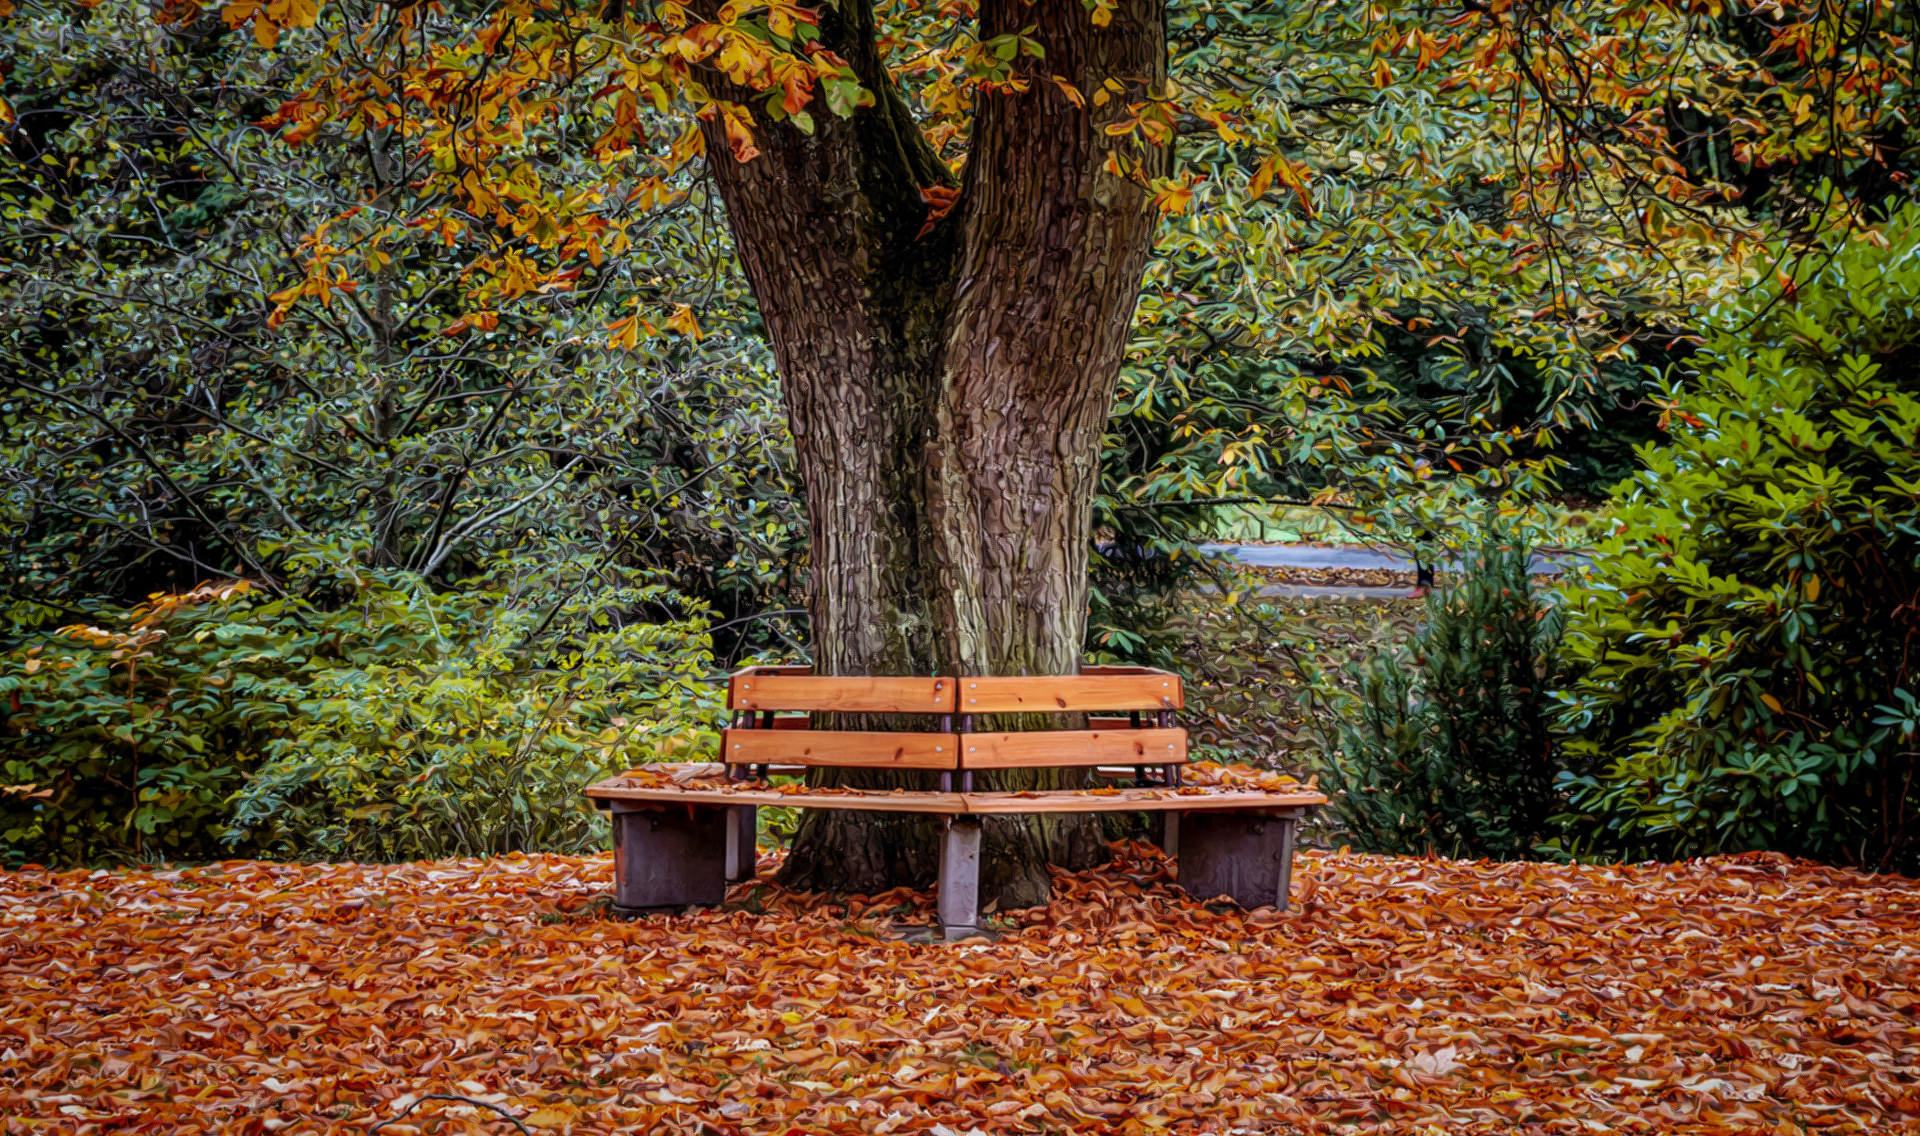 EXT. AUTUMN BENCH 2 – DAY